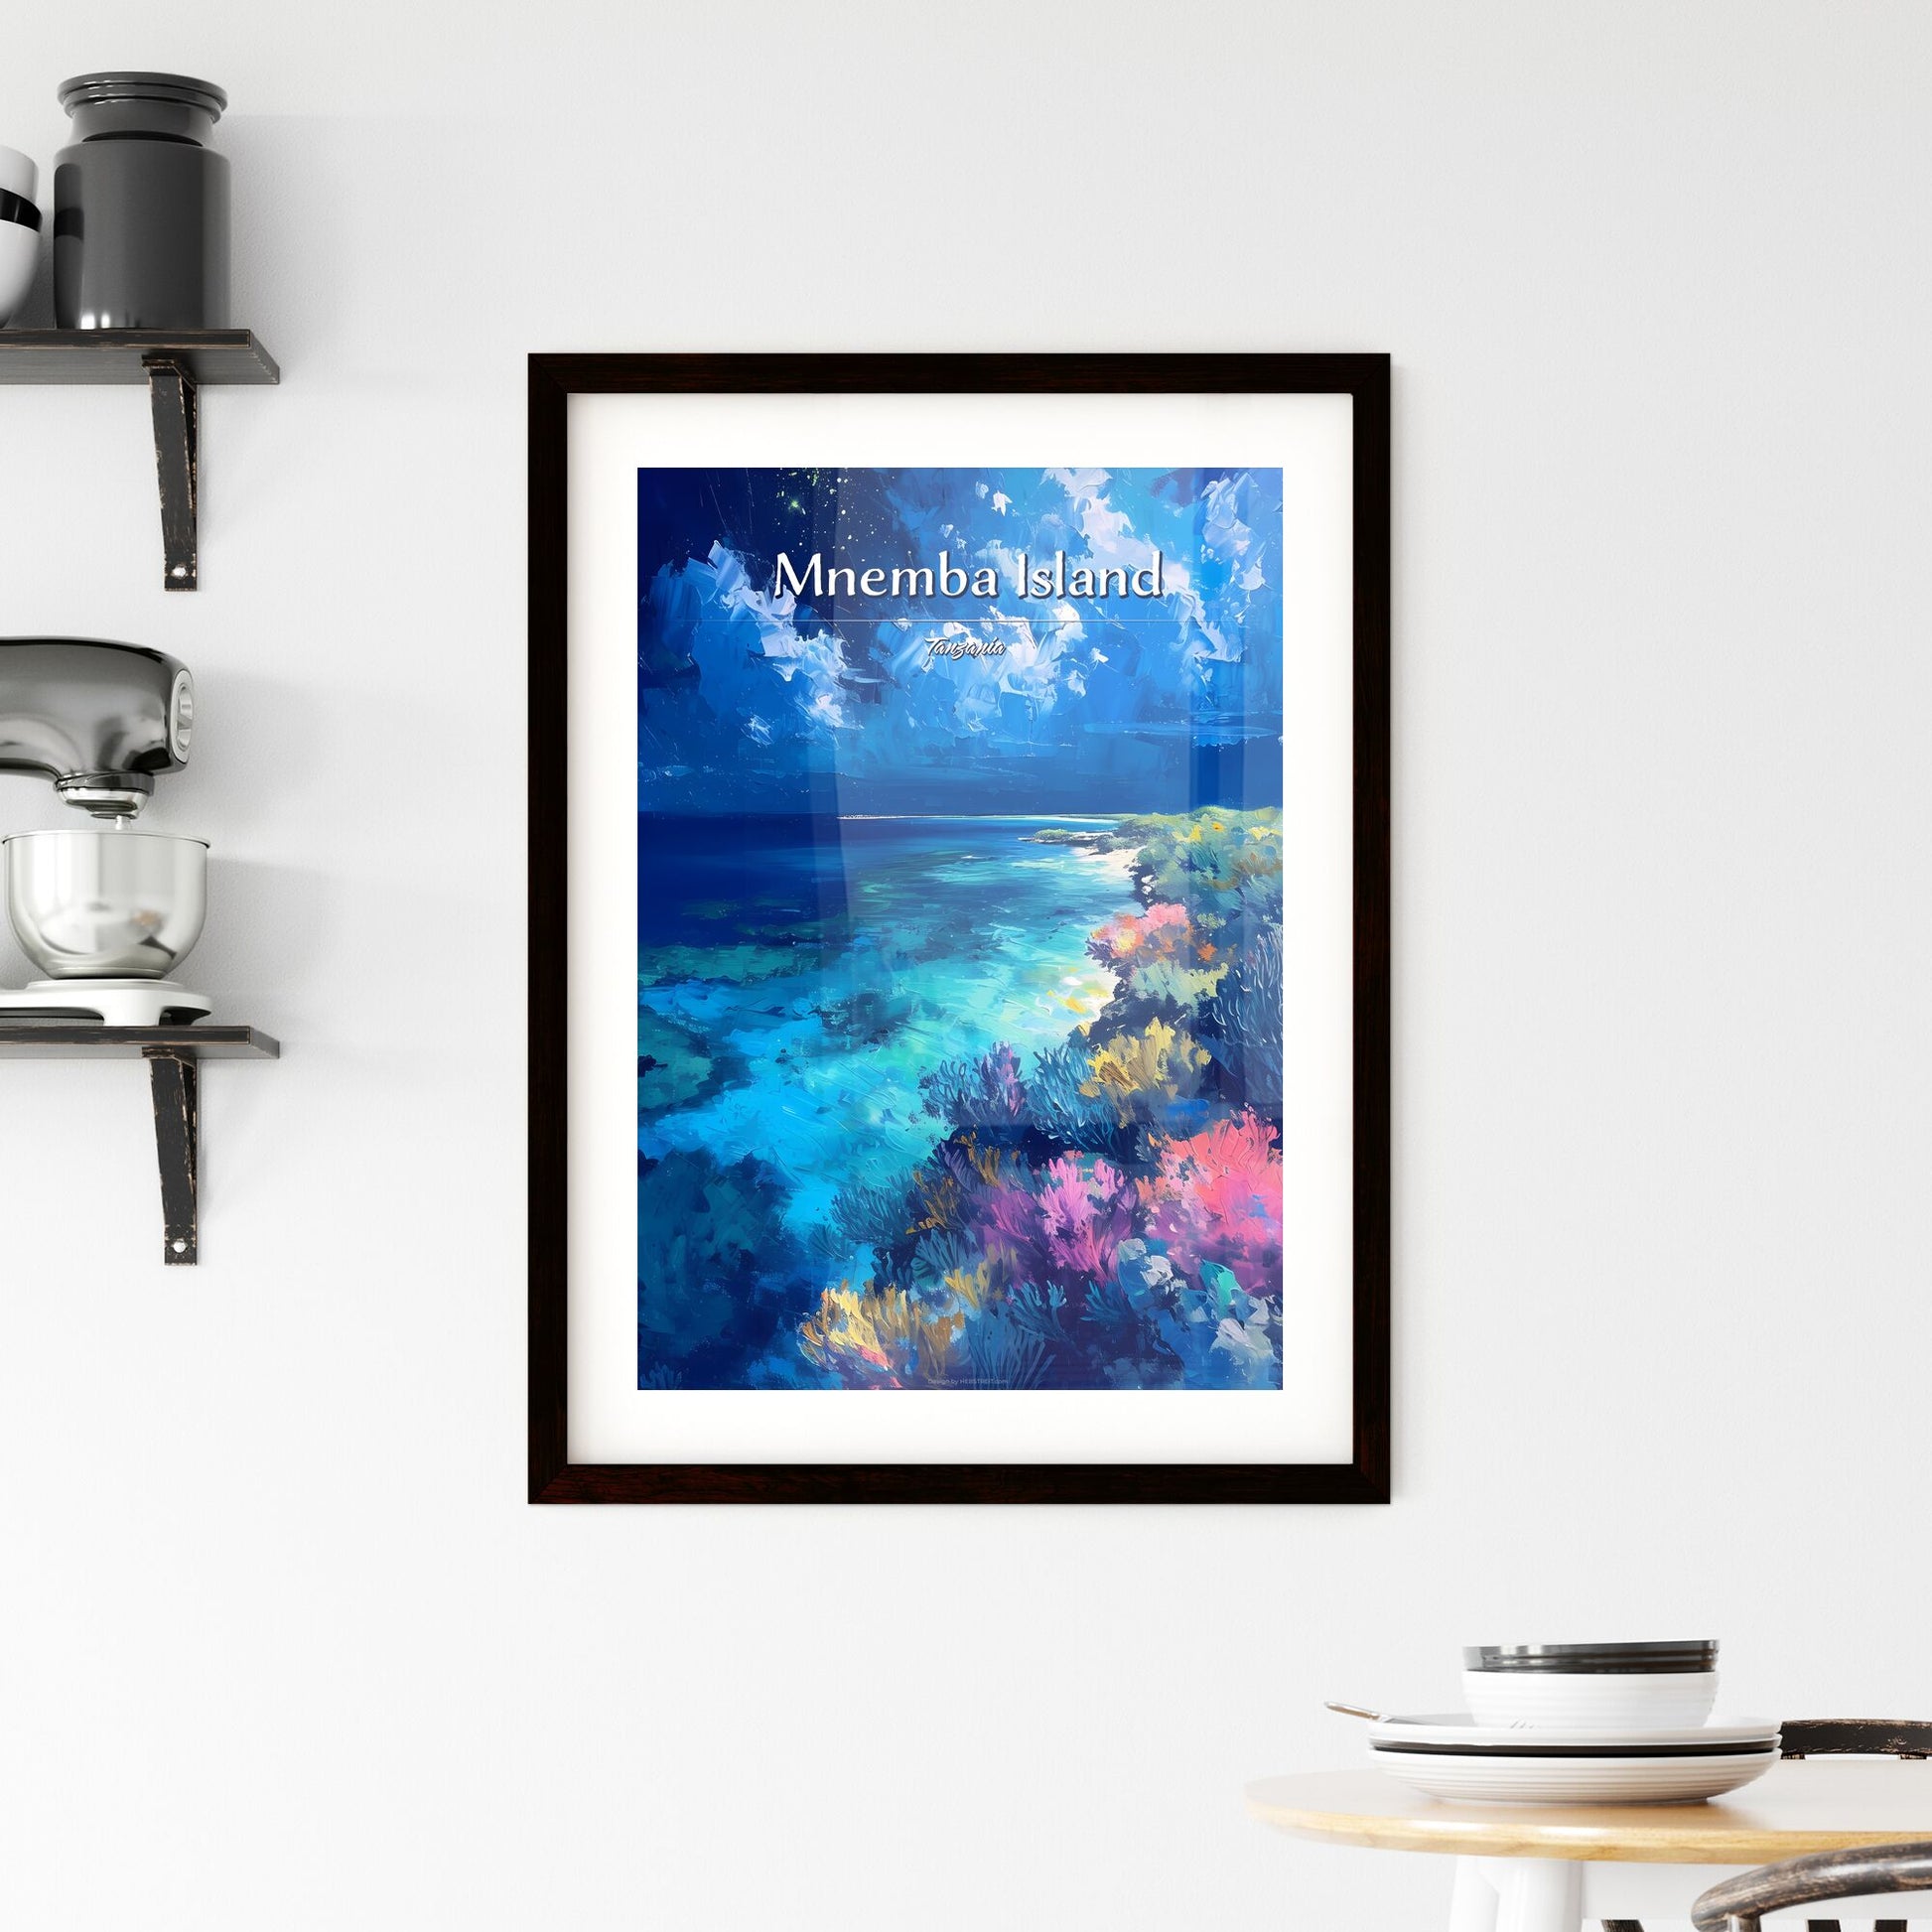 Mnemba Island, Tanzania - Art print of a painting of a beach and plants Default Title